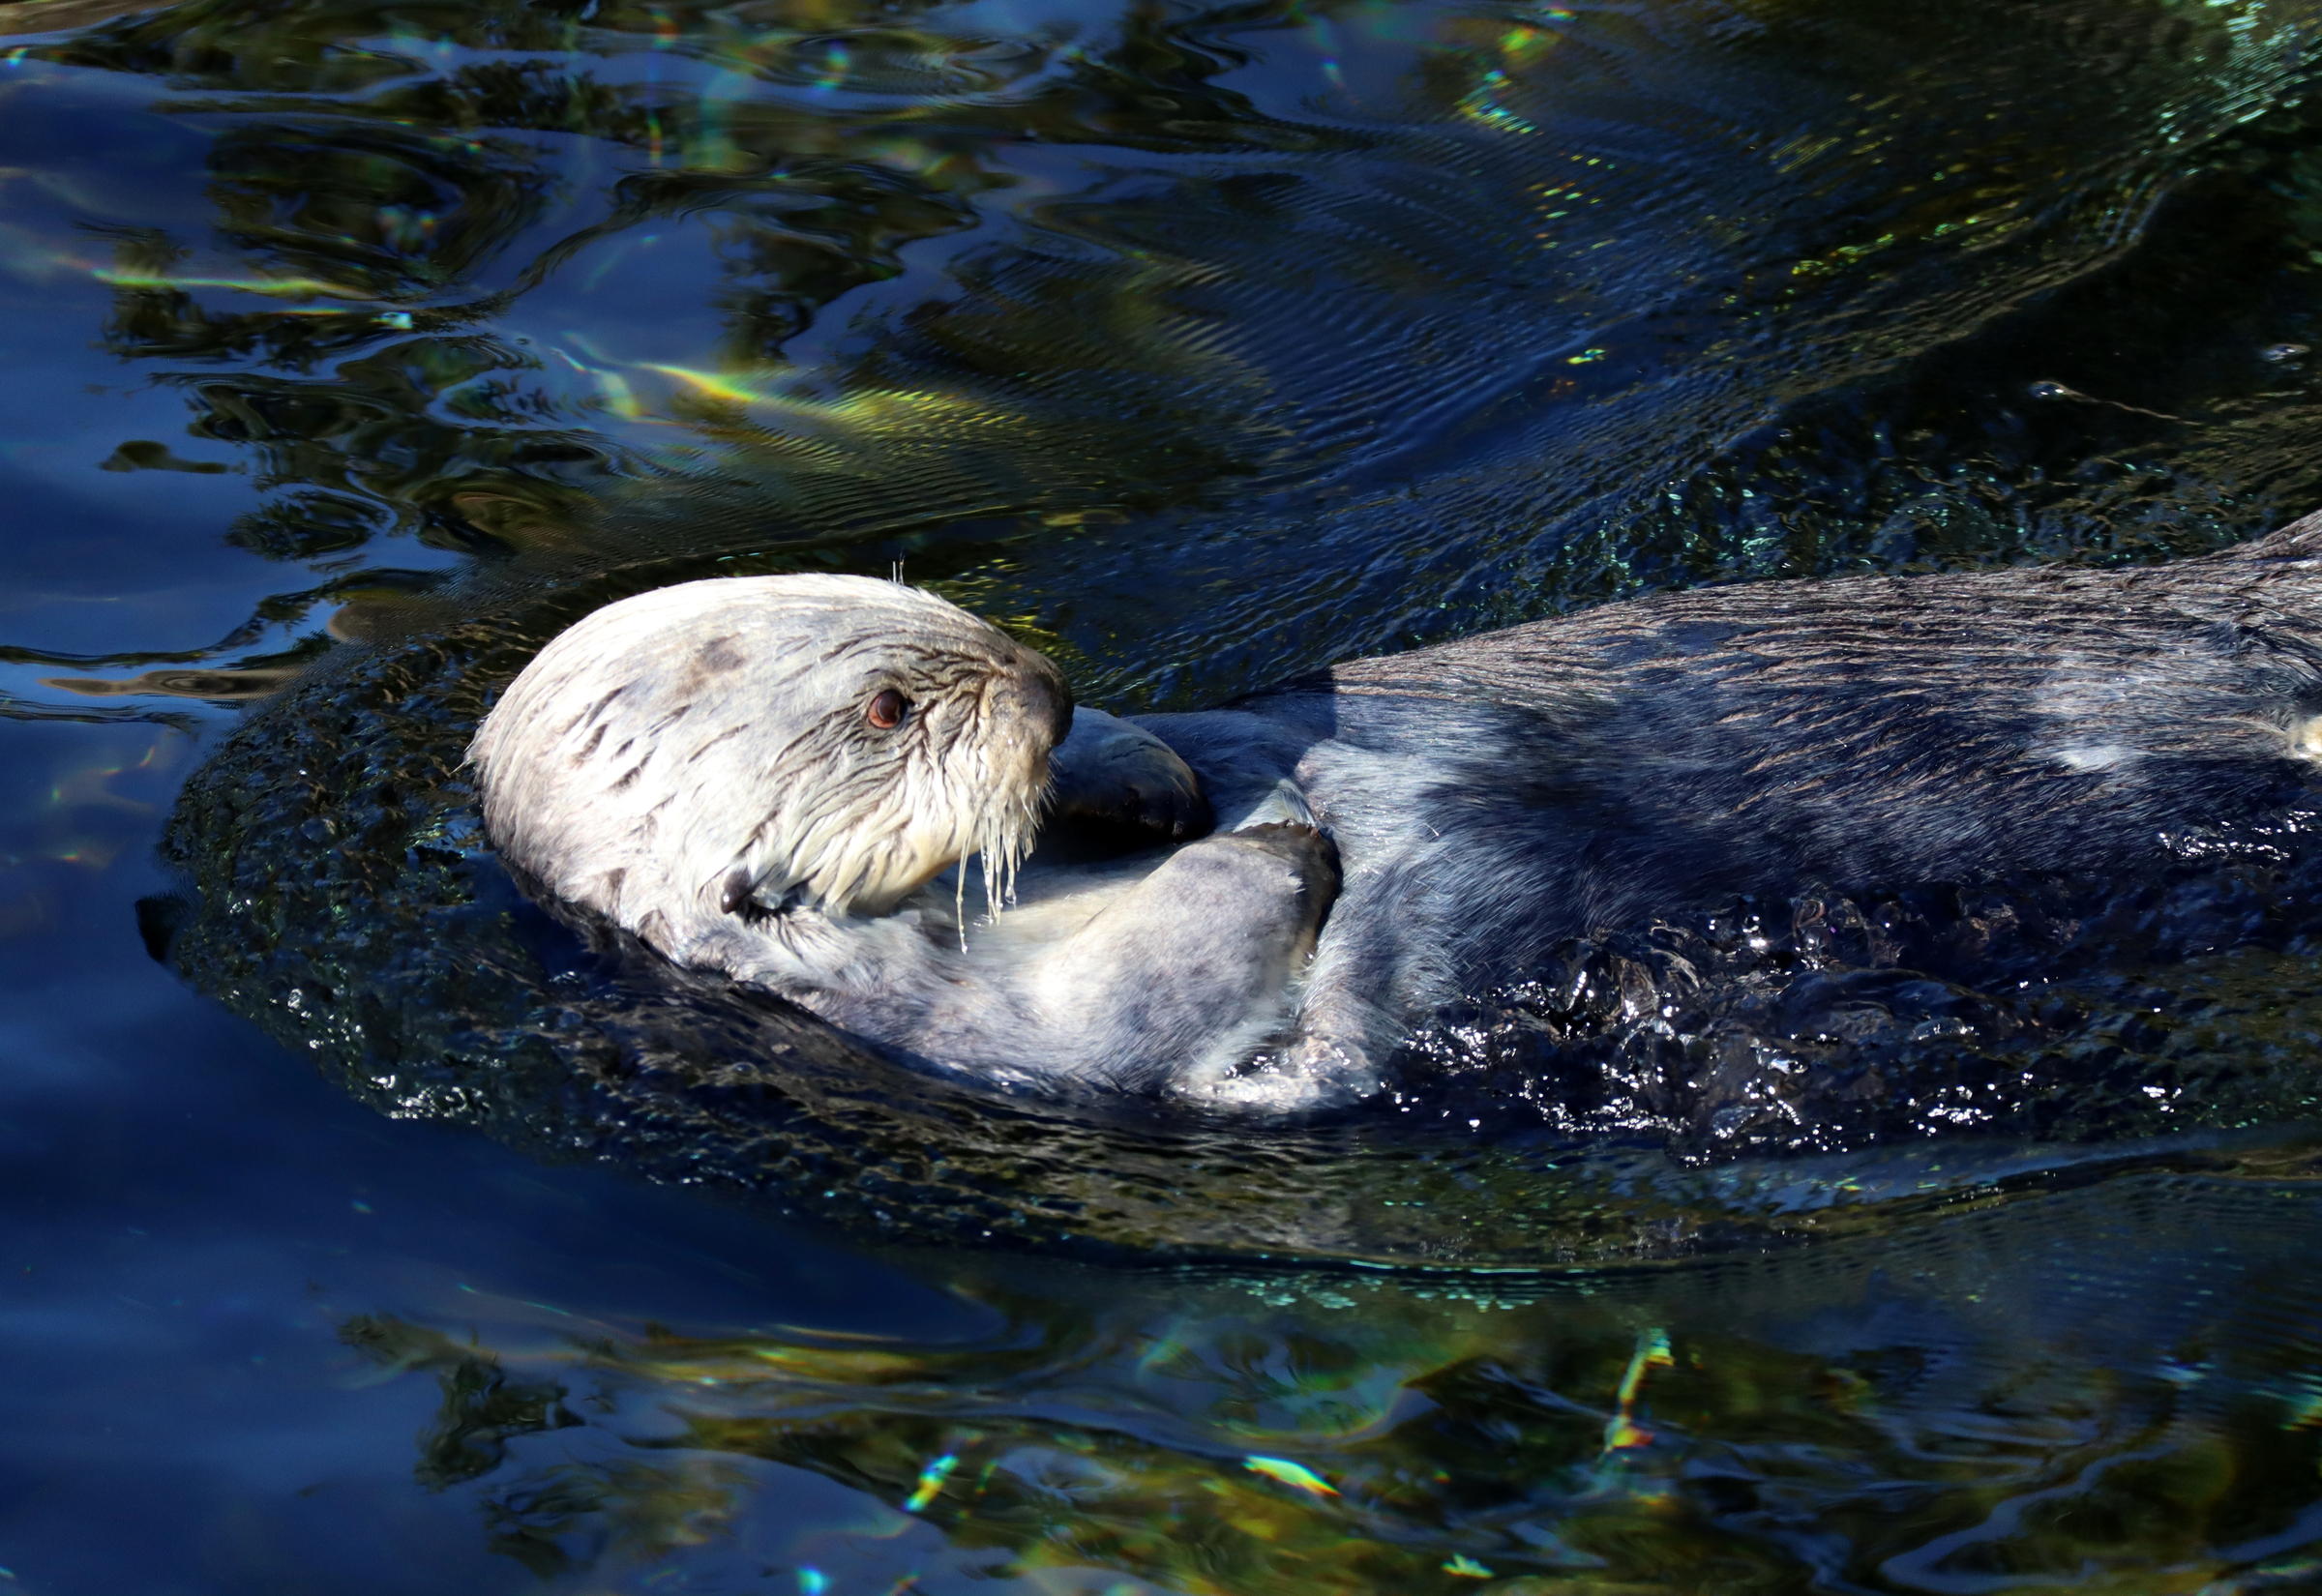 Presently, the only places to see sea otters in Oregon are at the Oregon Zoo and the Oregon Coast Aquarium, where this guy lives. CREDIT: TOM BANSE